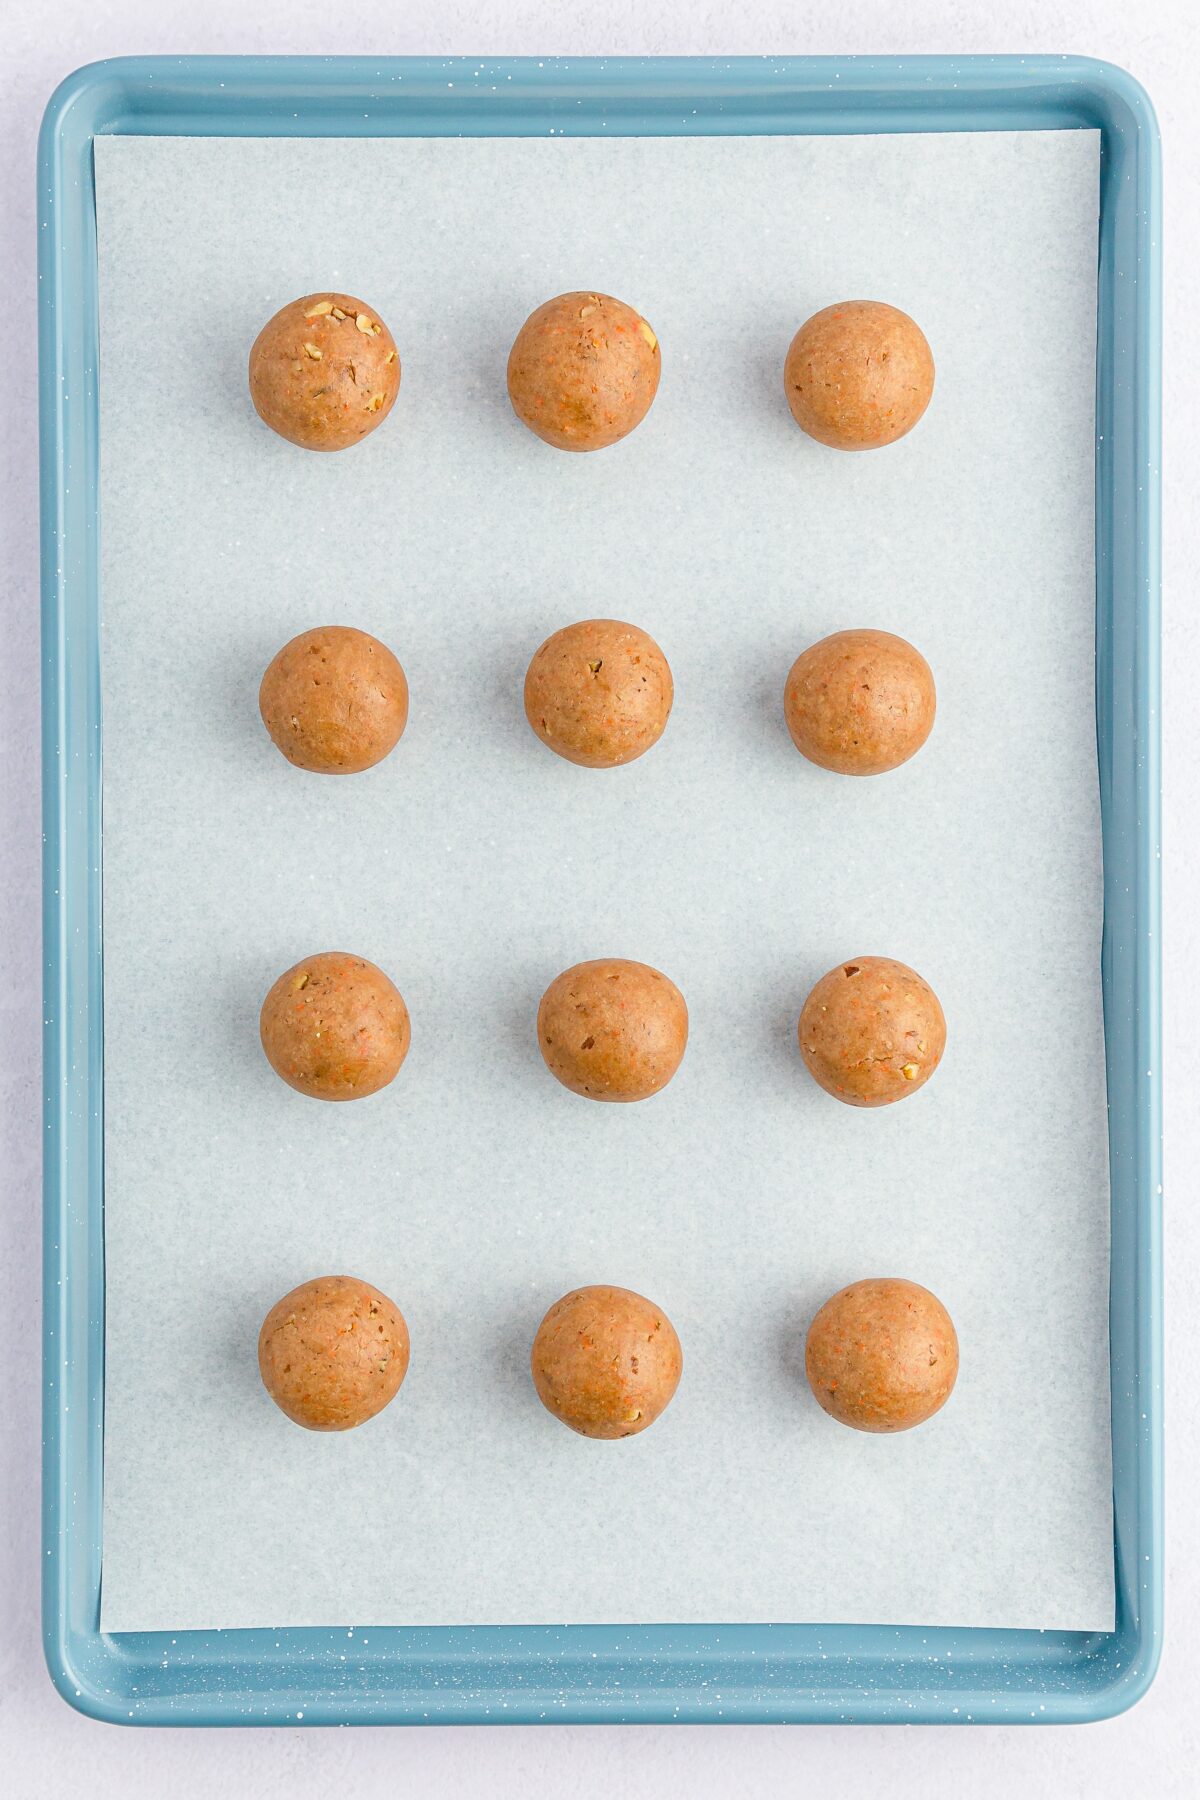 Carrot cake mixture rolled into balls and placed on a baking sheet.